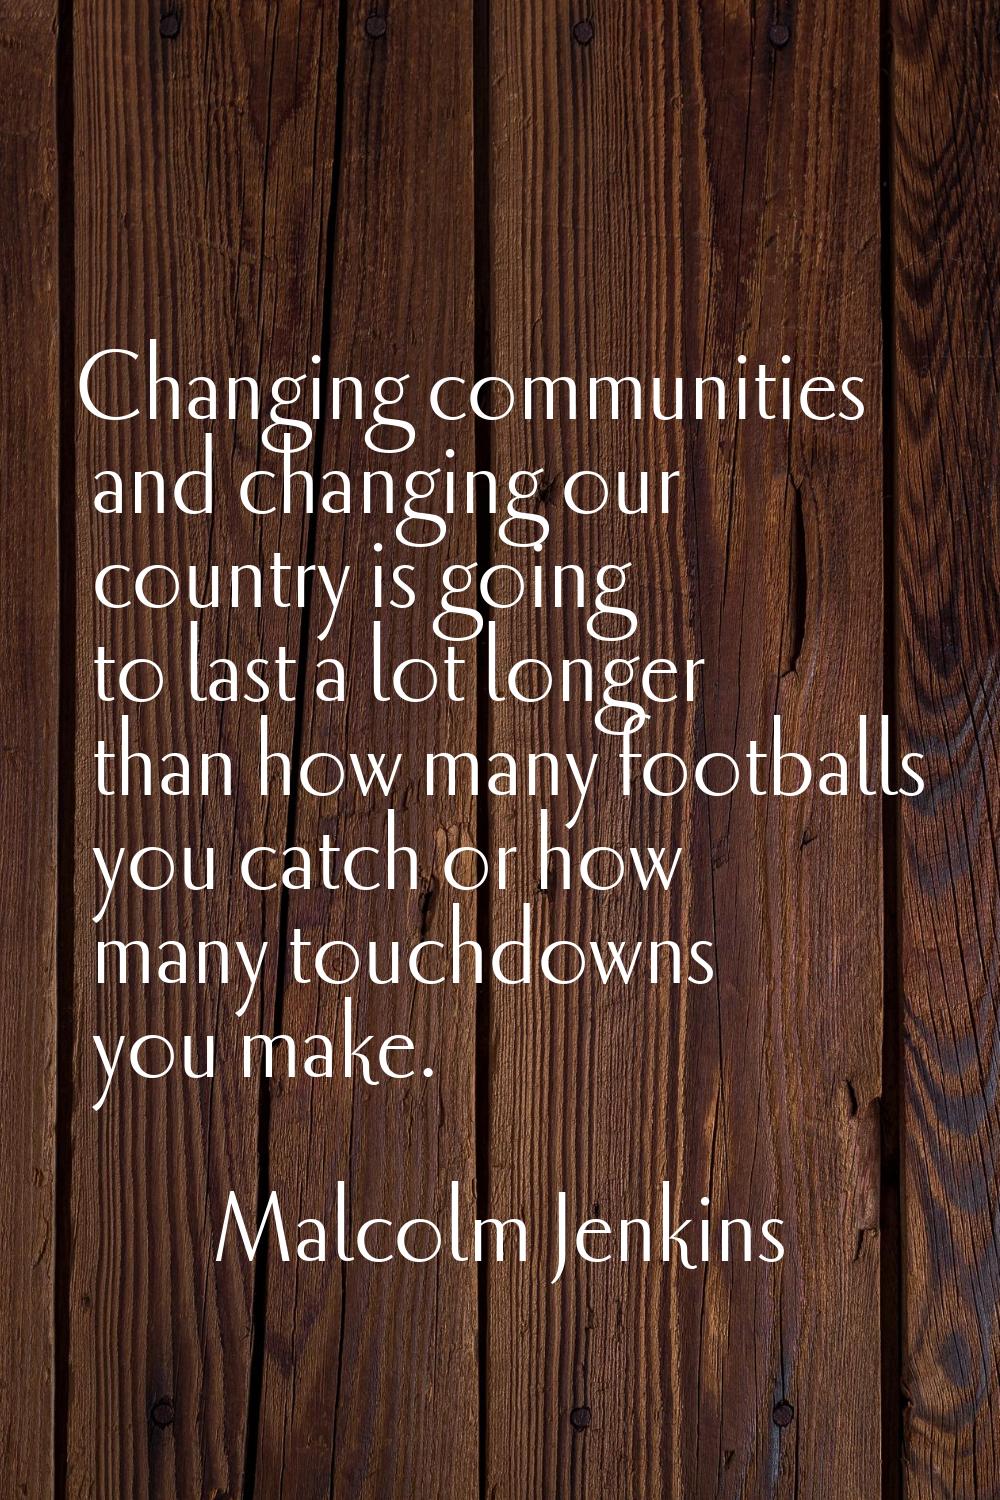 Changing communities and changing our country is going to last a lot longer than how many footballs